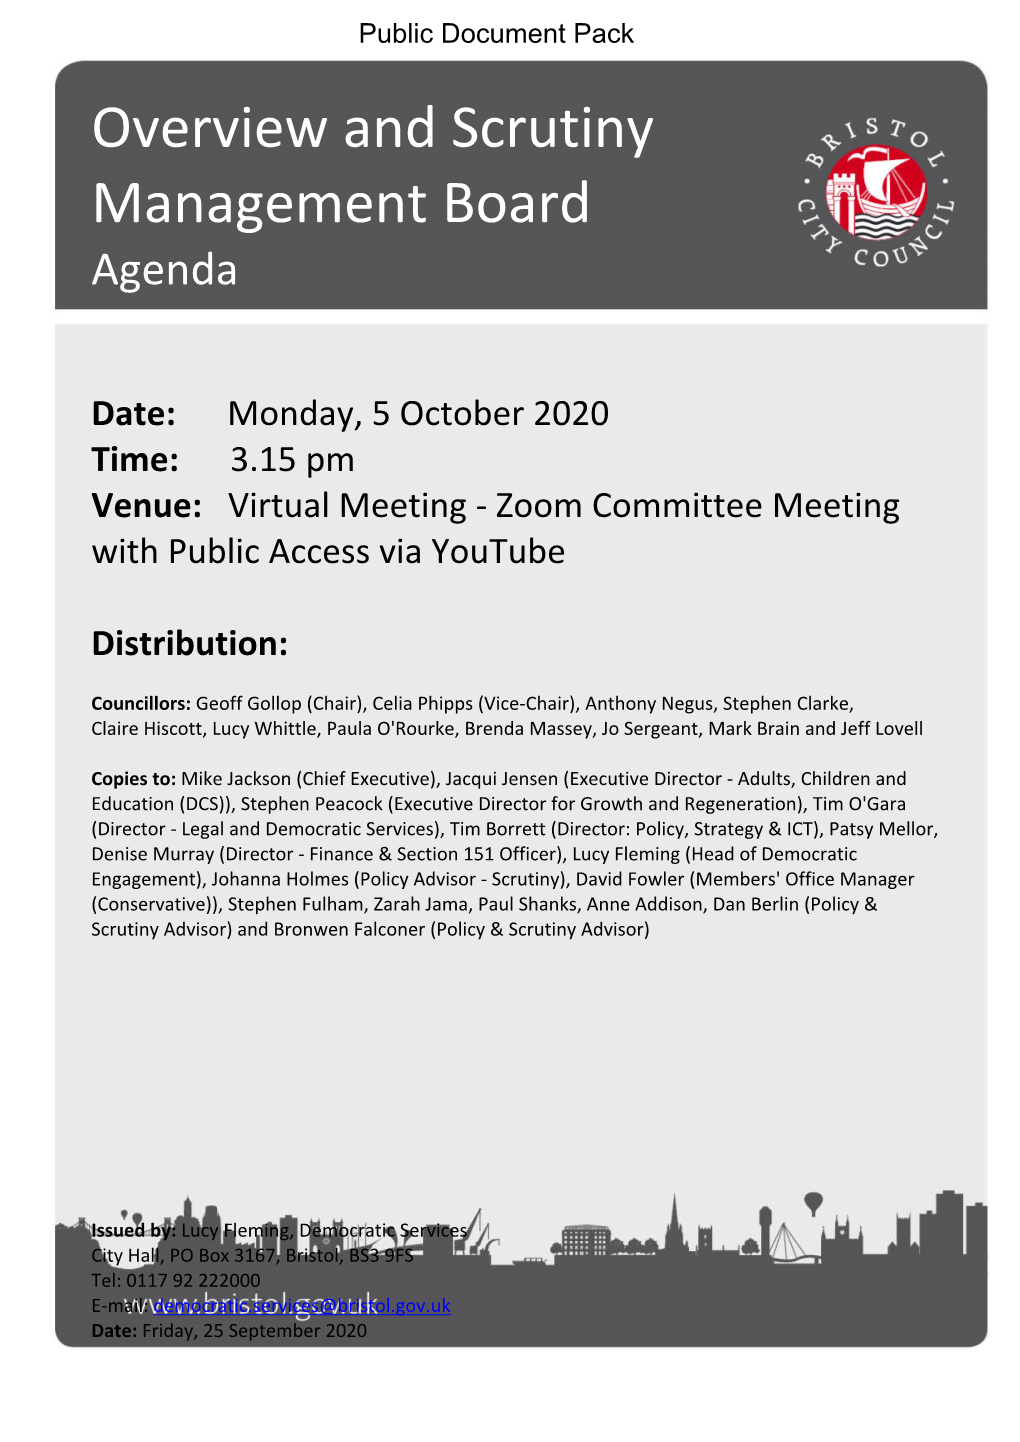 (Public Pack)Public Forum Agenda Supplement for Overview And